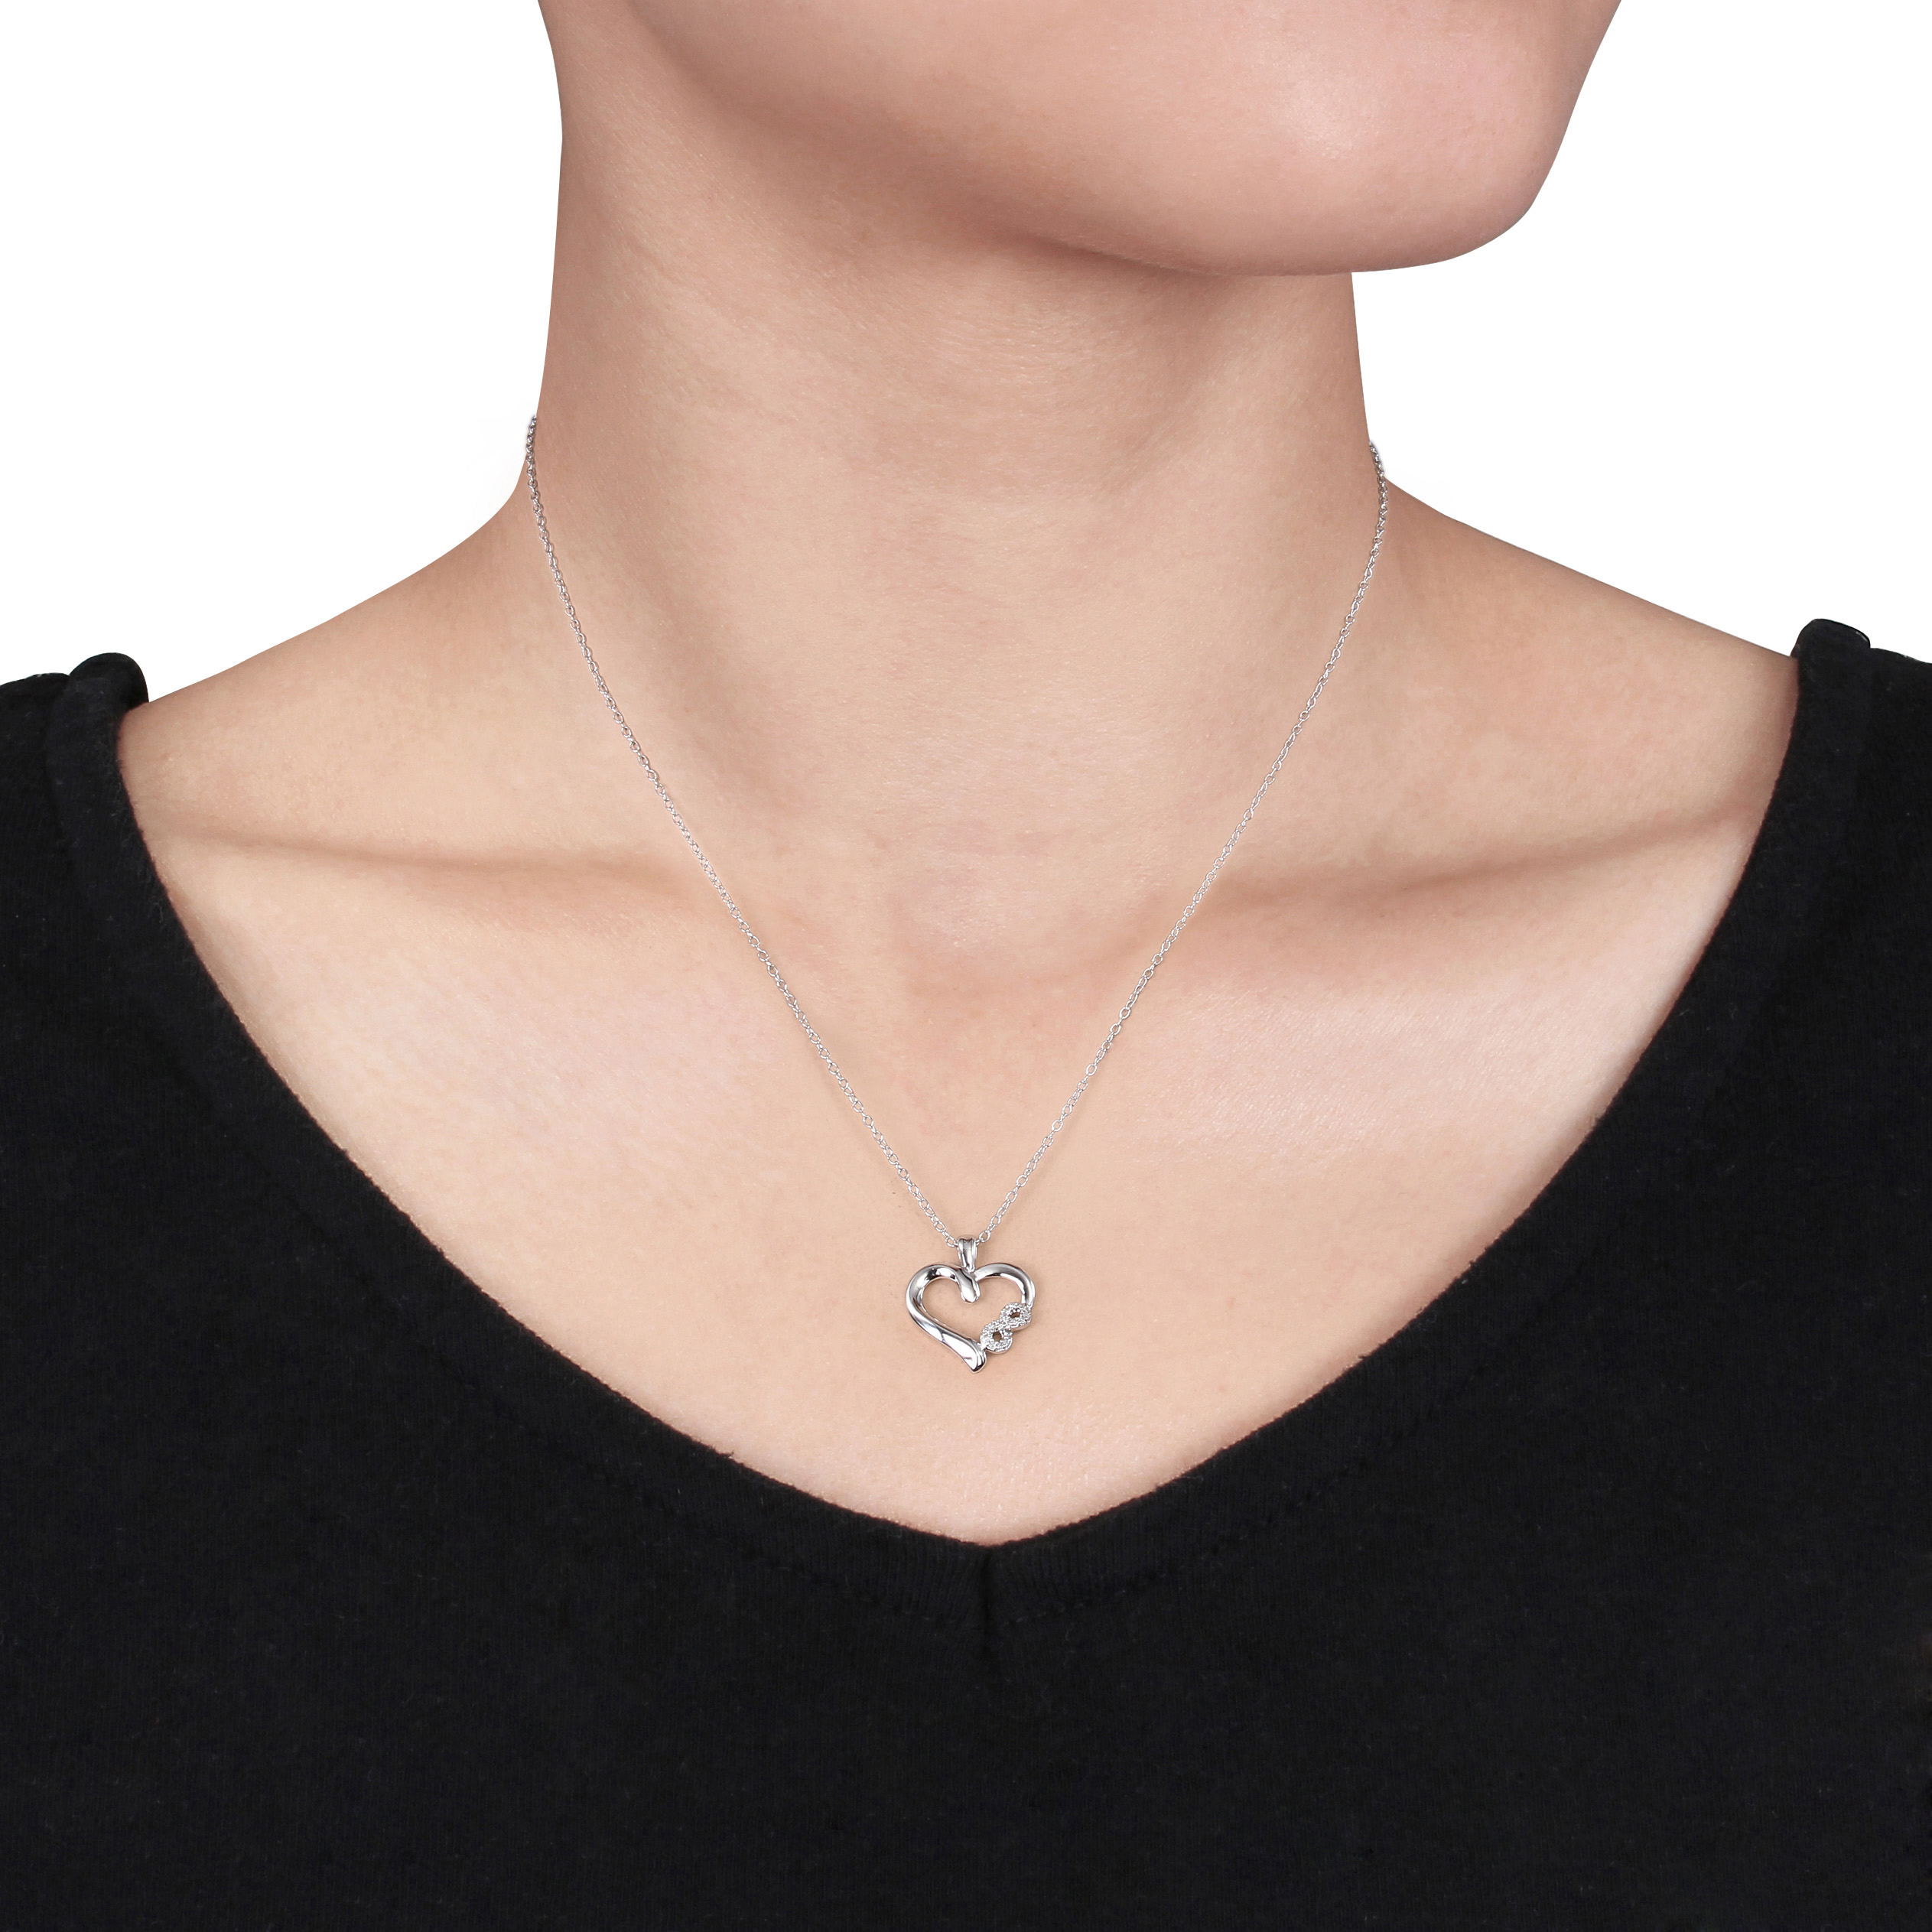 Diamond Infinity Heart Pendant with Chain in Sterling Silver - 18 in.